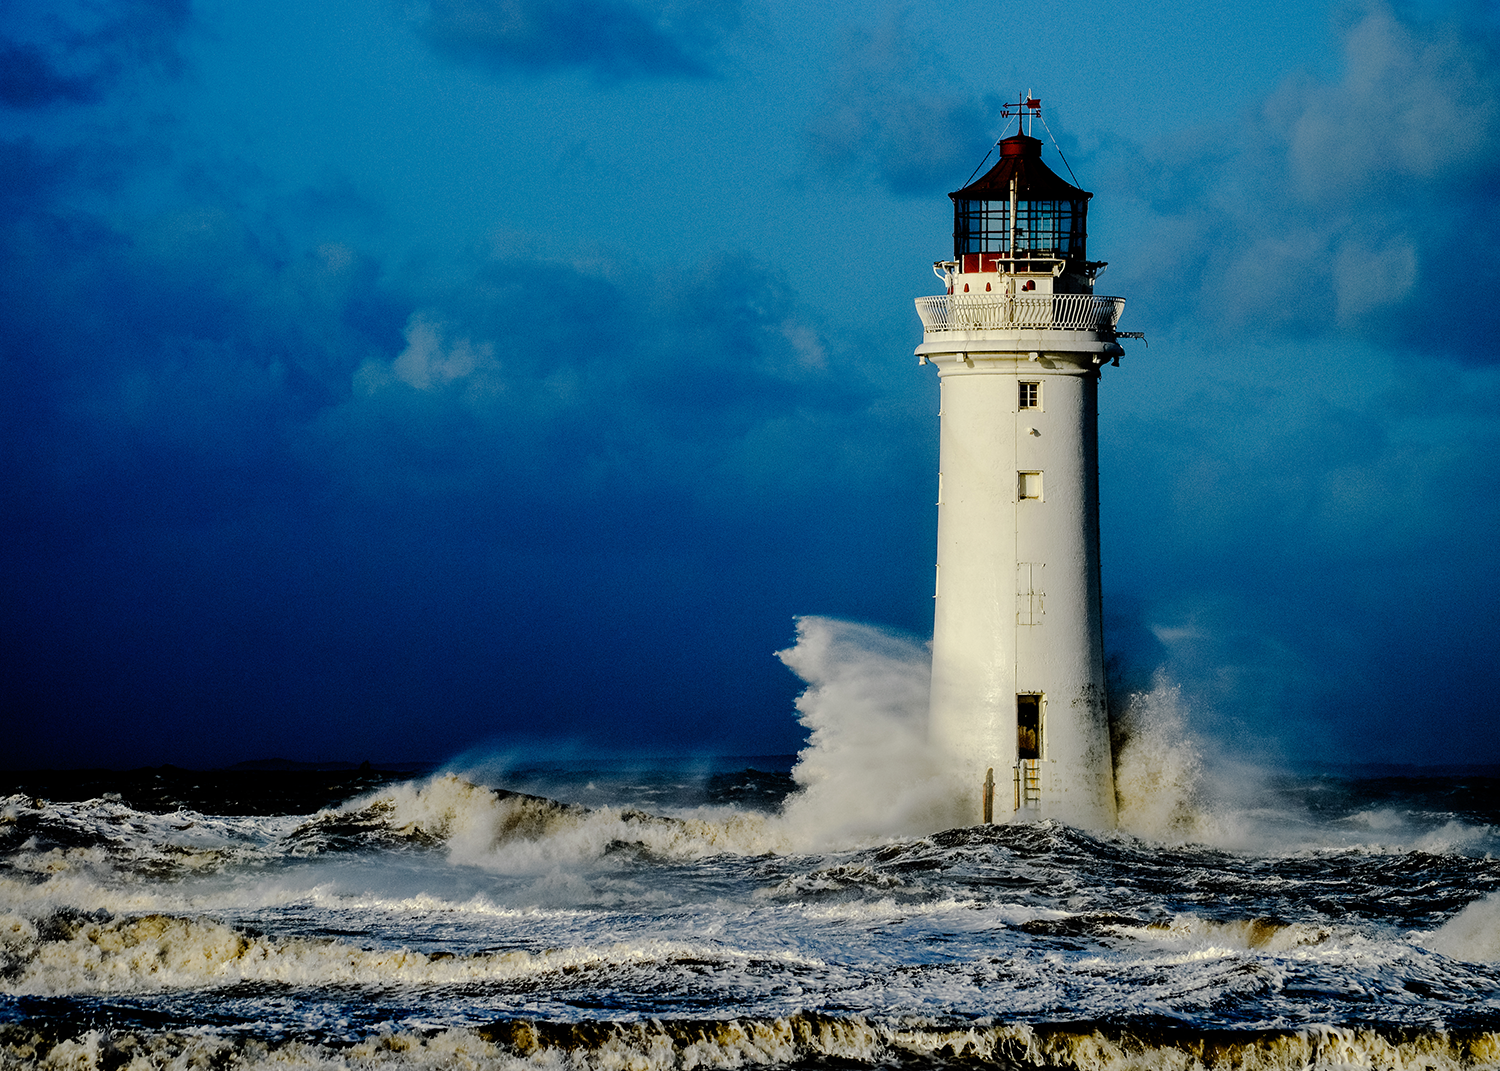 Lighthouse weathering the storm